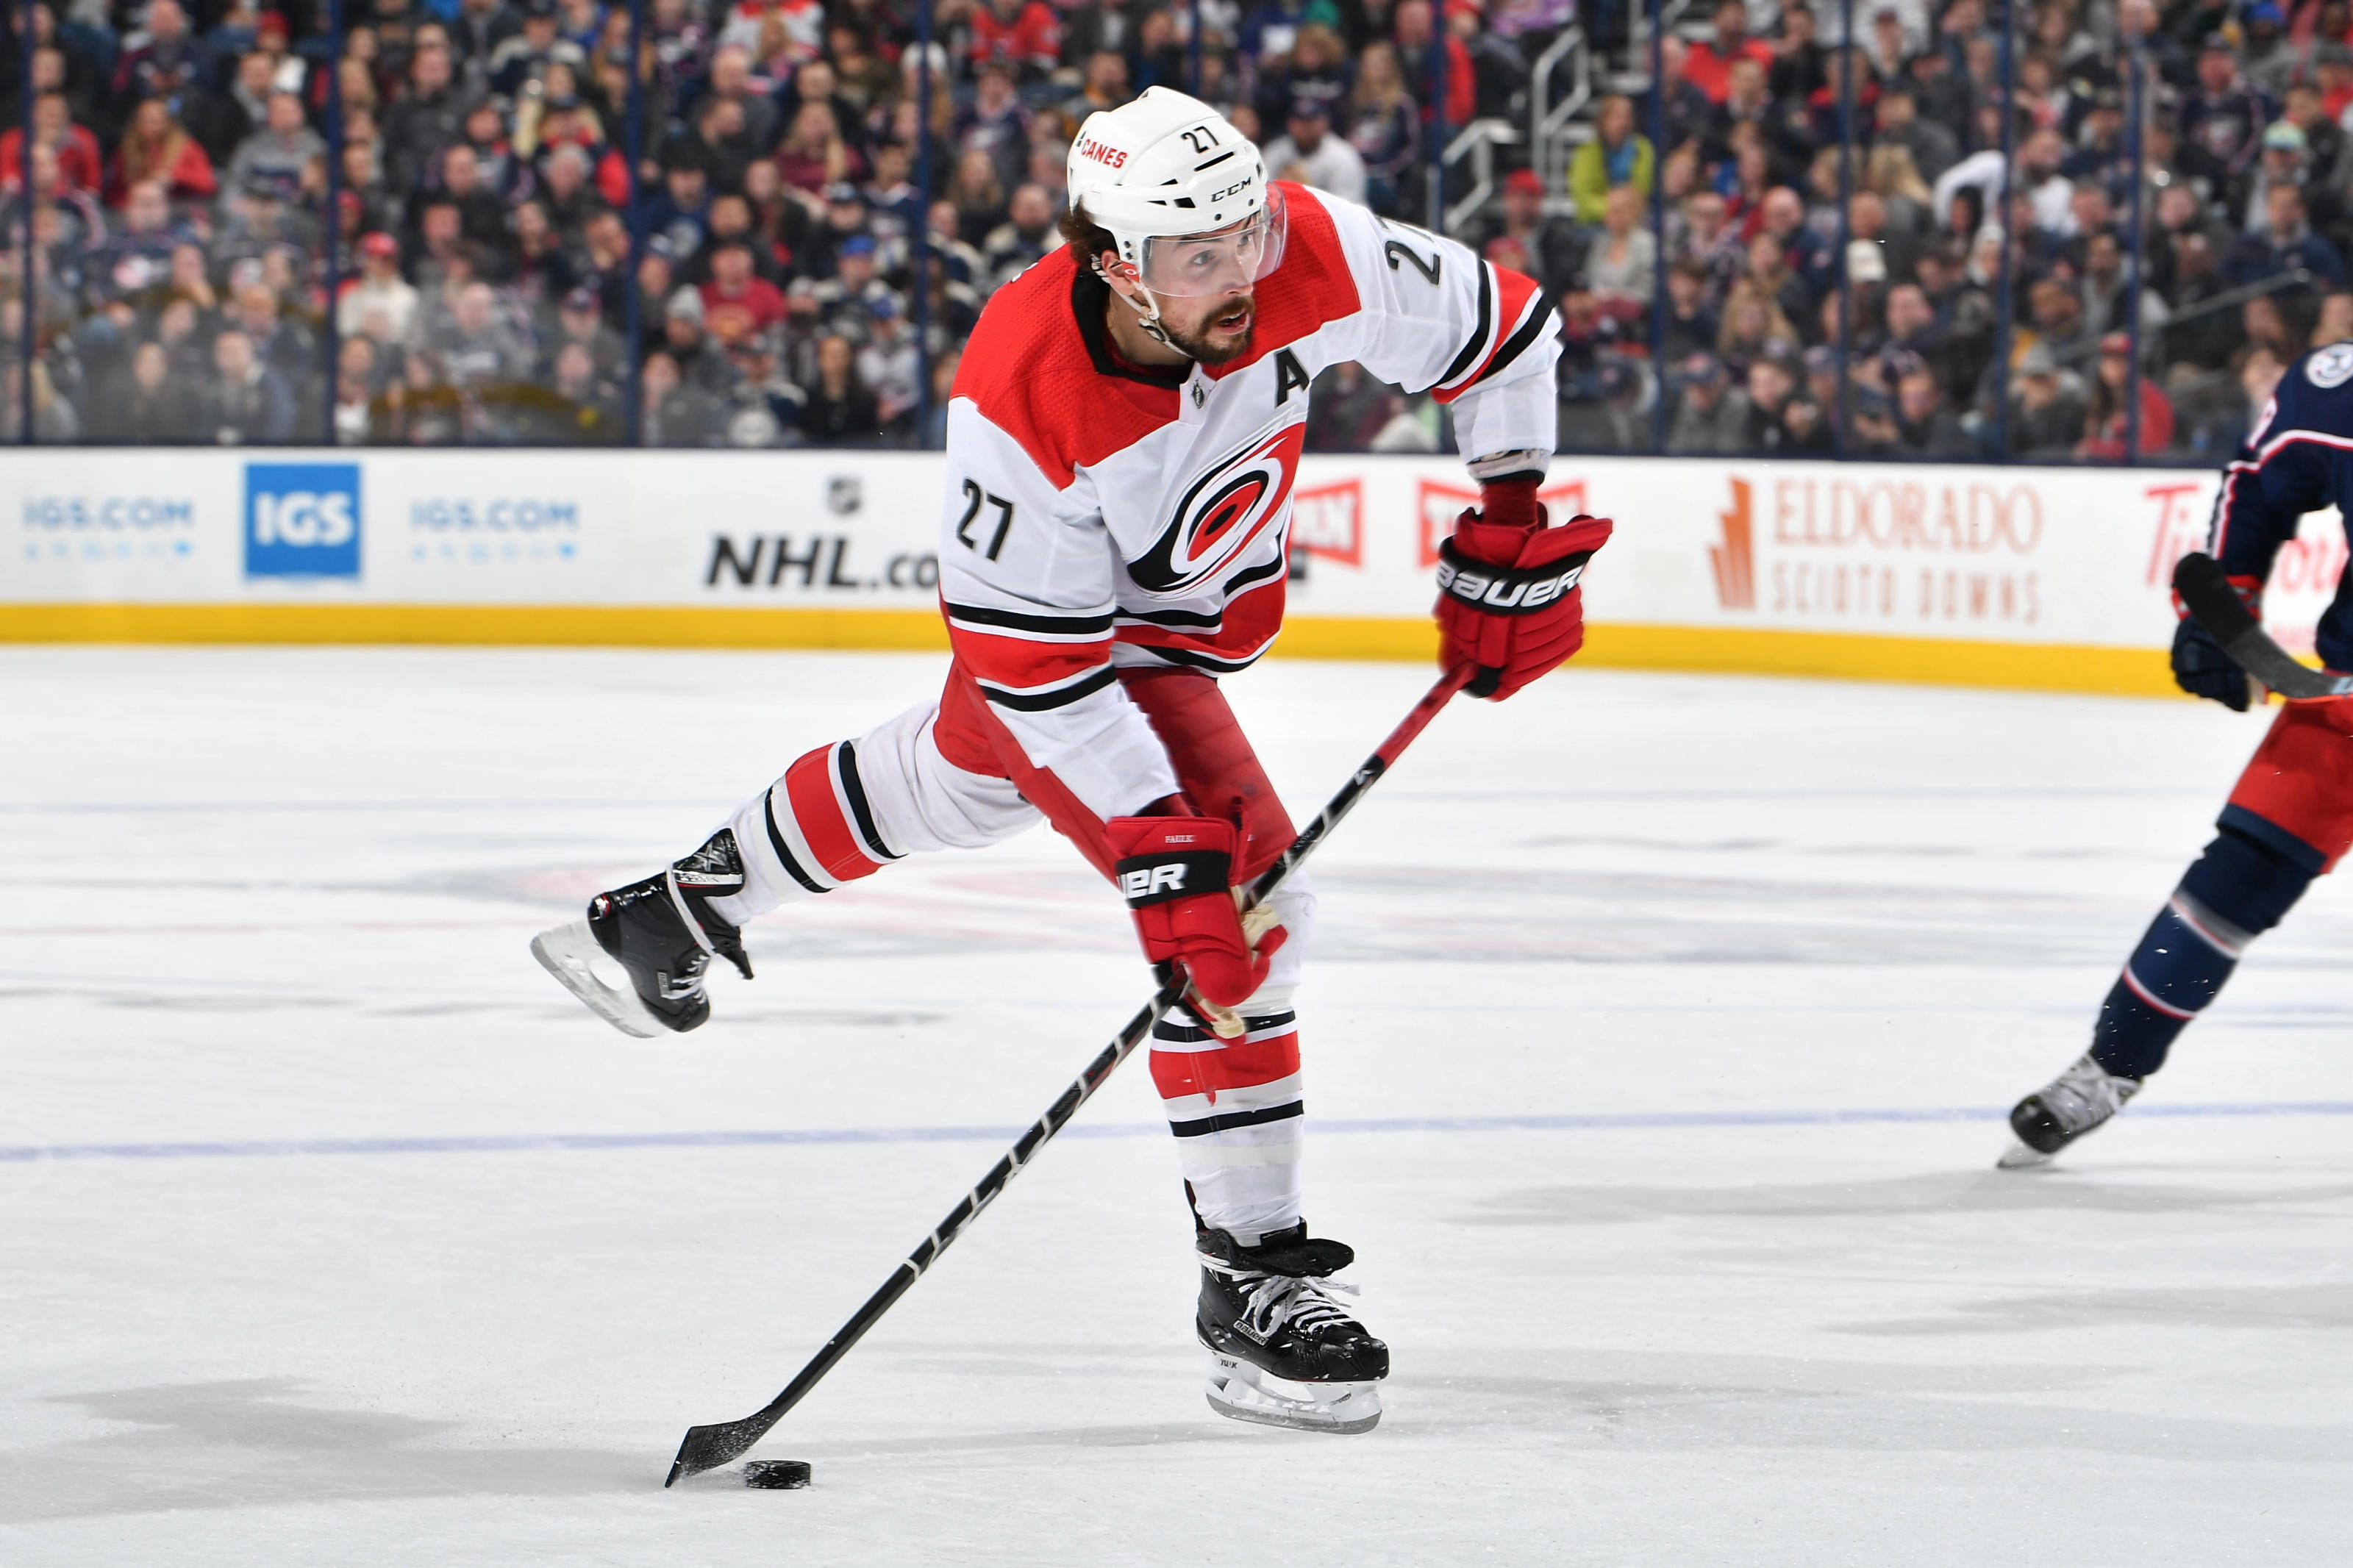 VIDEO: One-on-one with Carolina Hurricanes rookie Justin Faulk